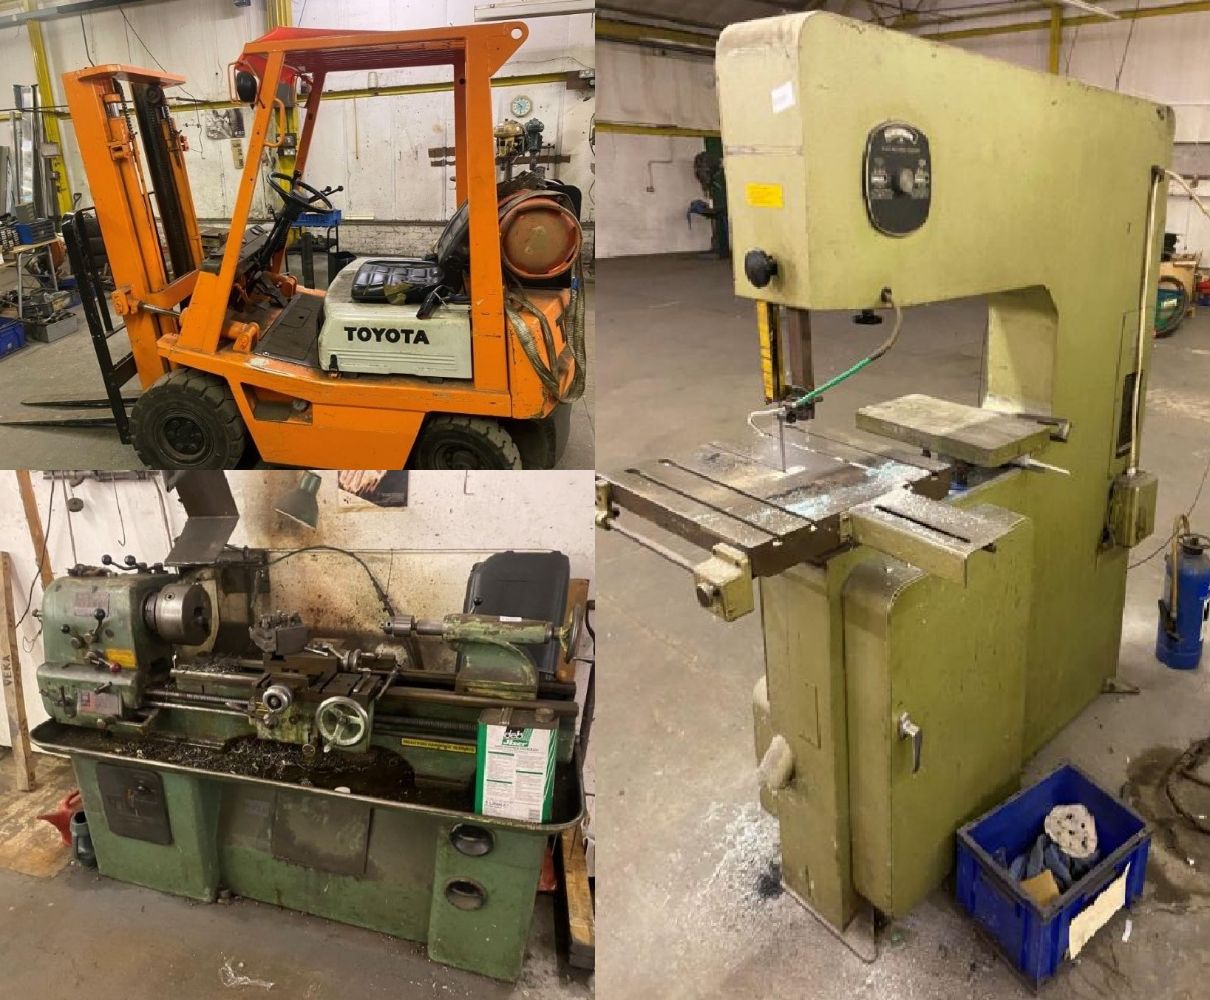 Contents of Engineering Business In Solihull - Includes Spray Booth, Pillar Drills, Lathe, Bandsaws, Welders and More